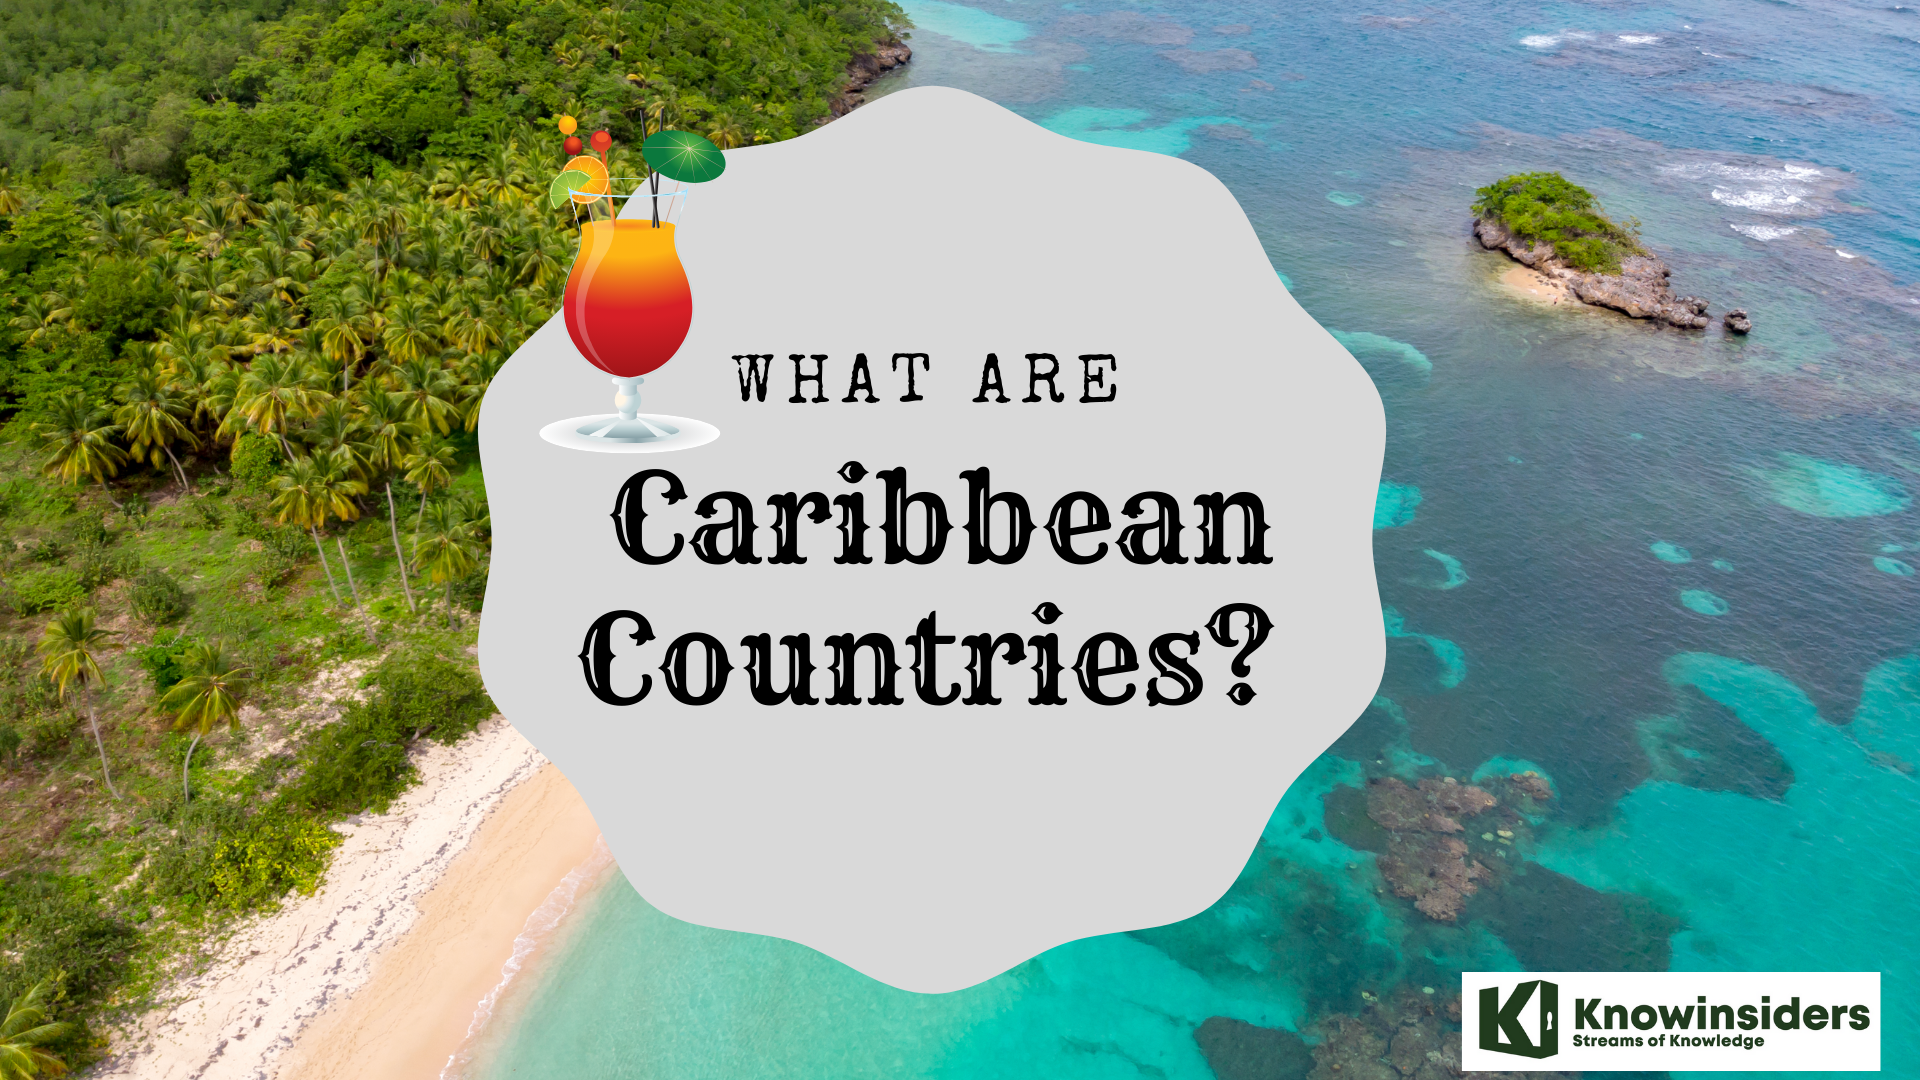 How Many Countries & Territories Are There in Caribbean Today?